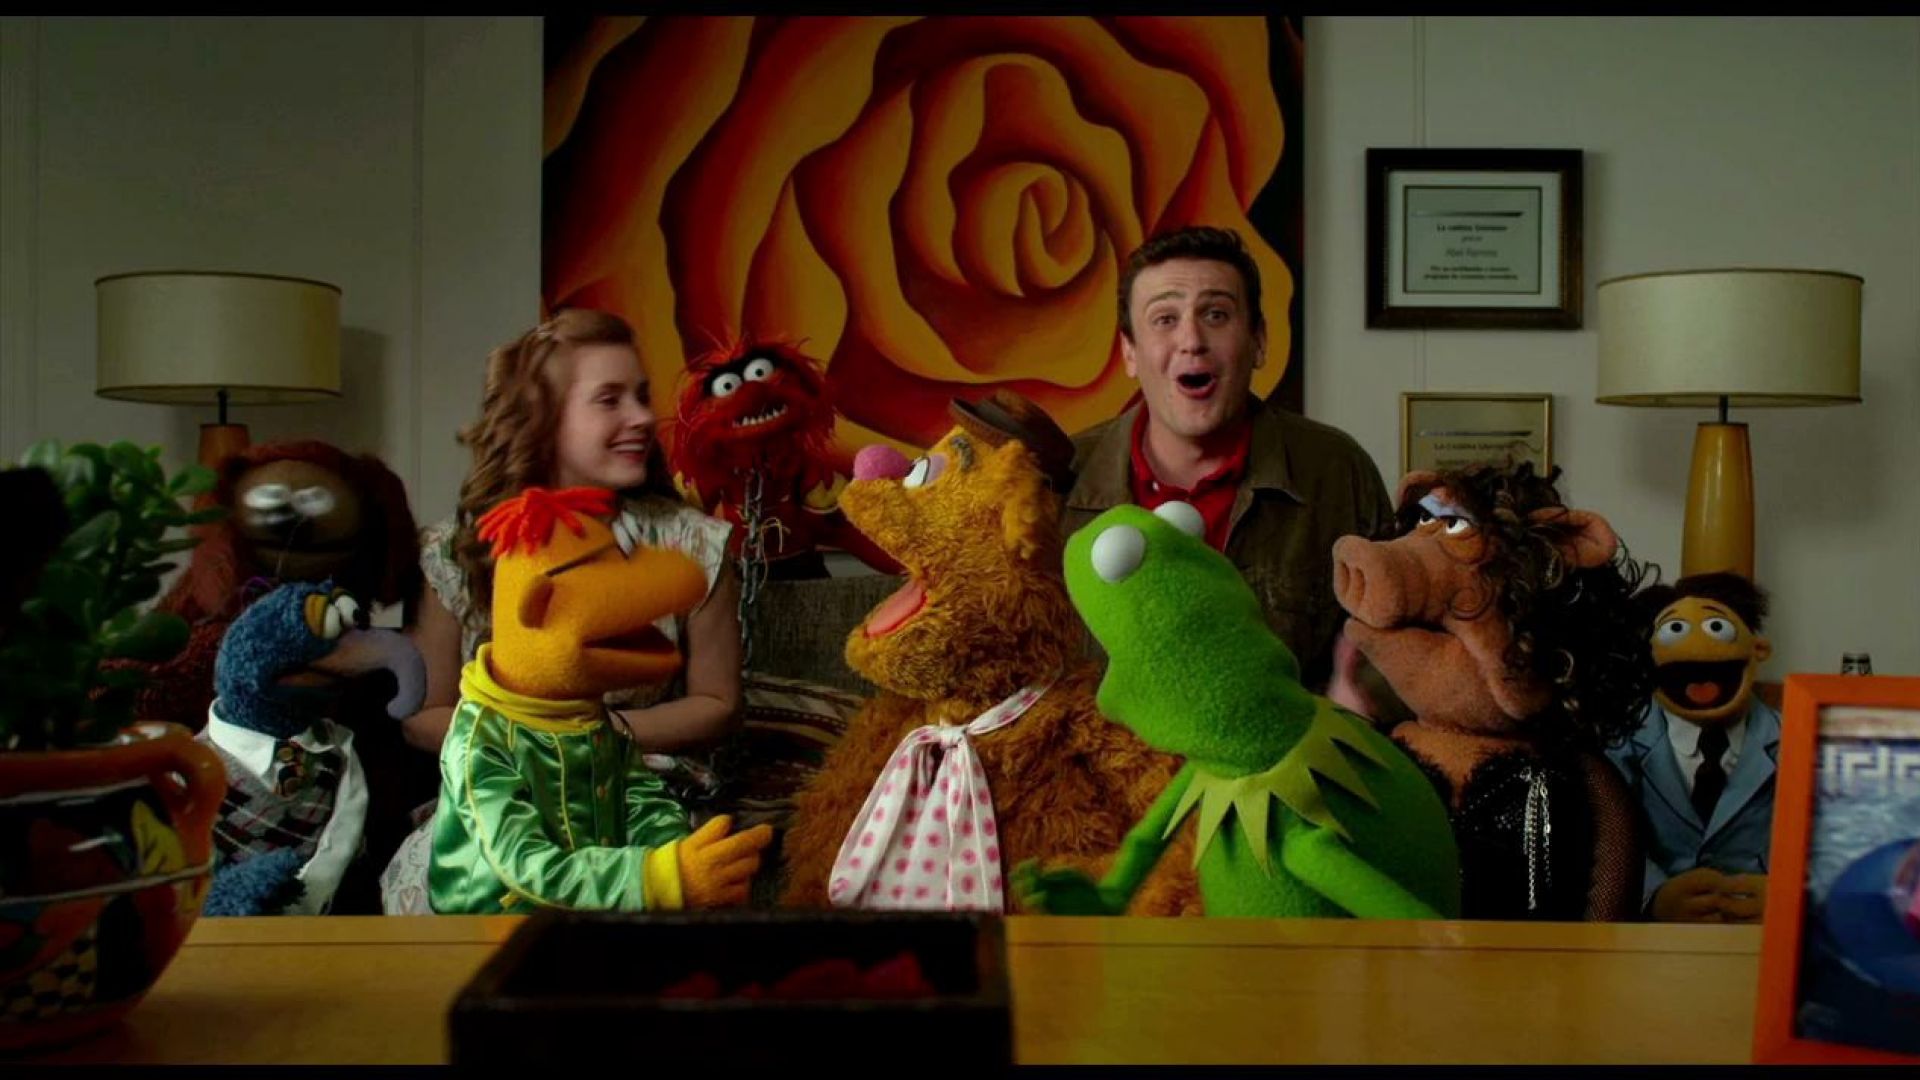 Los siento pero no. The Muppets pitch their TV show